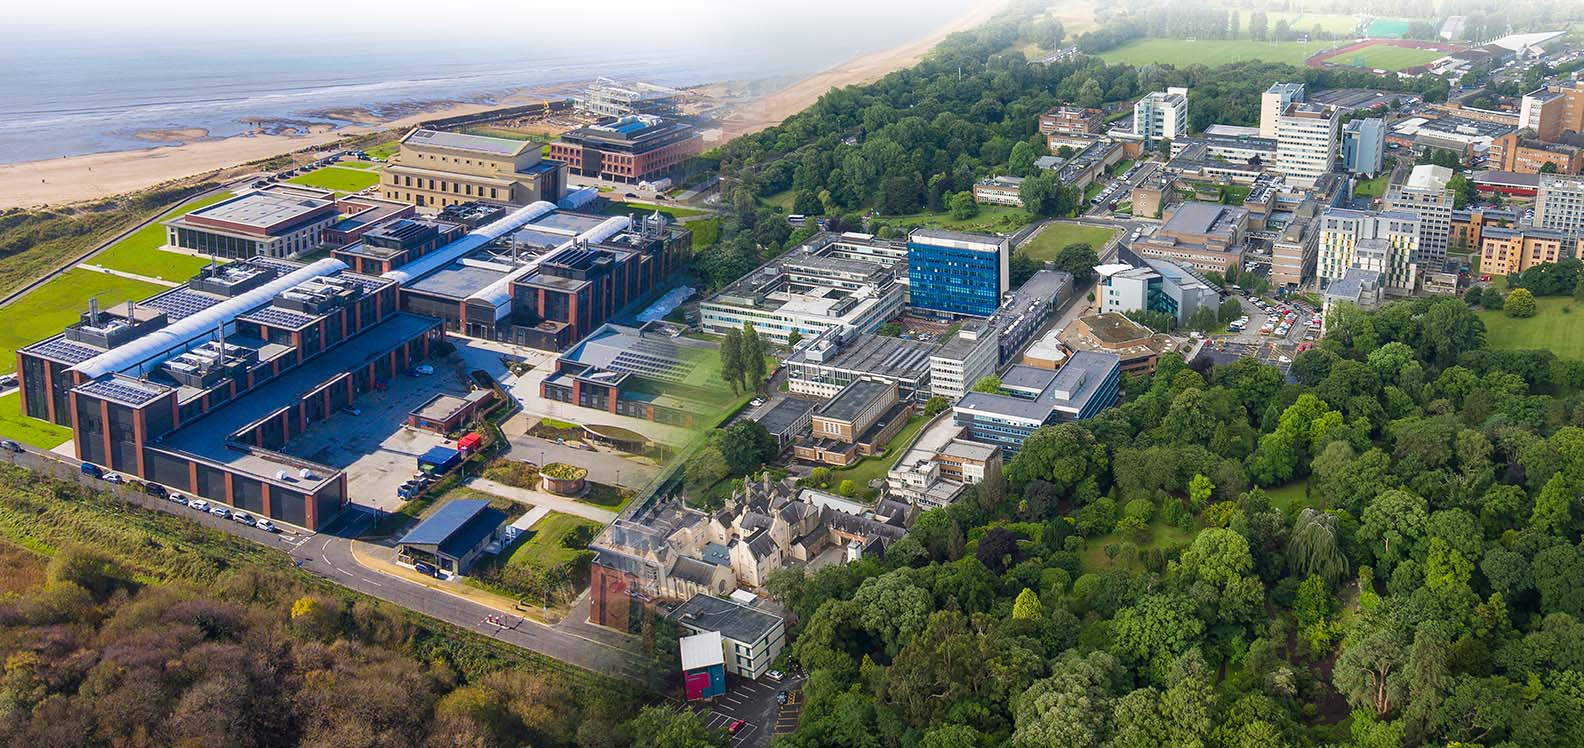 Aerial view of both Bay and Singleton Campuses